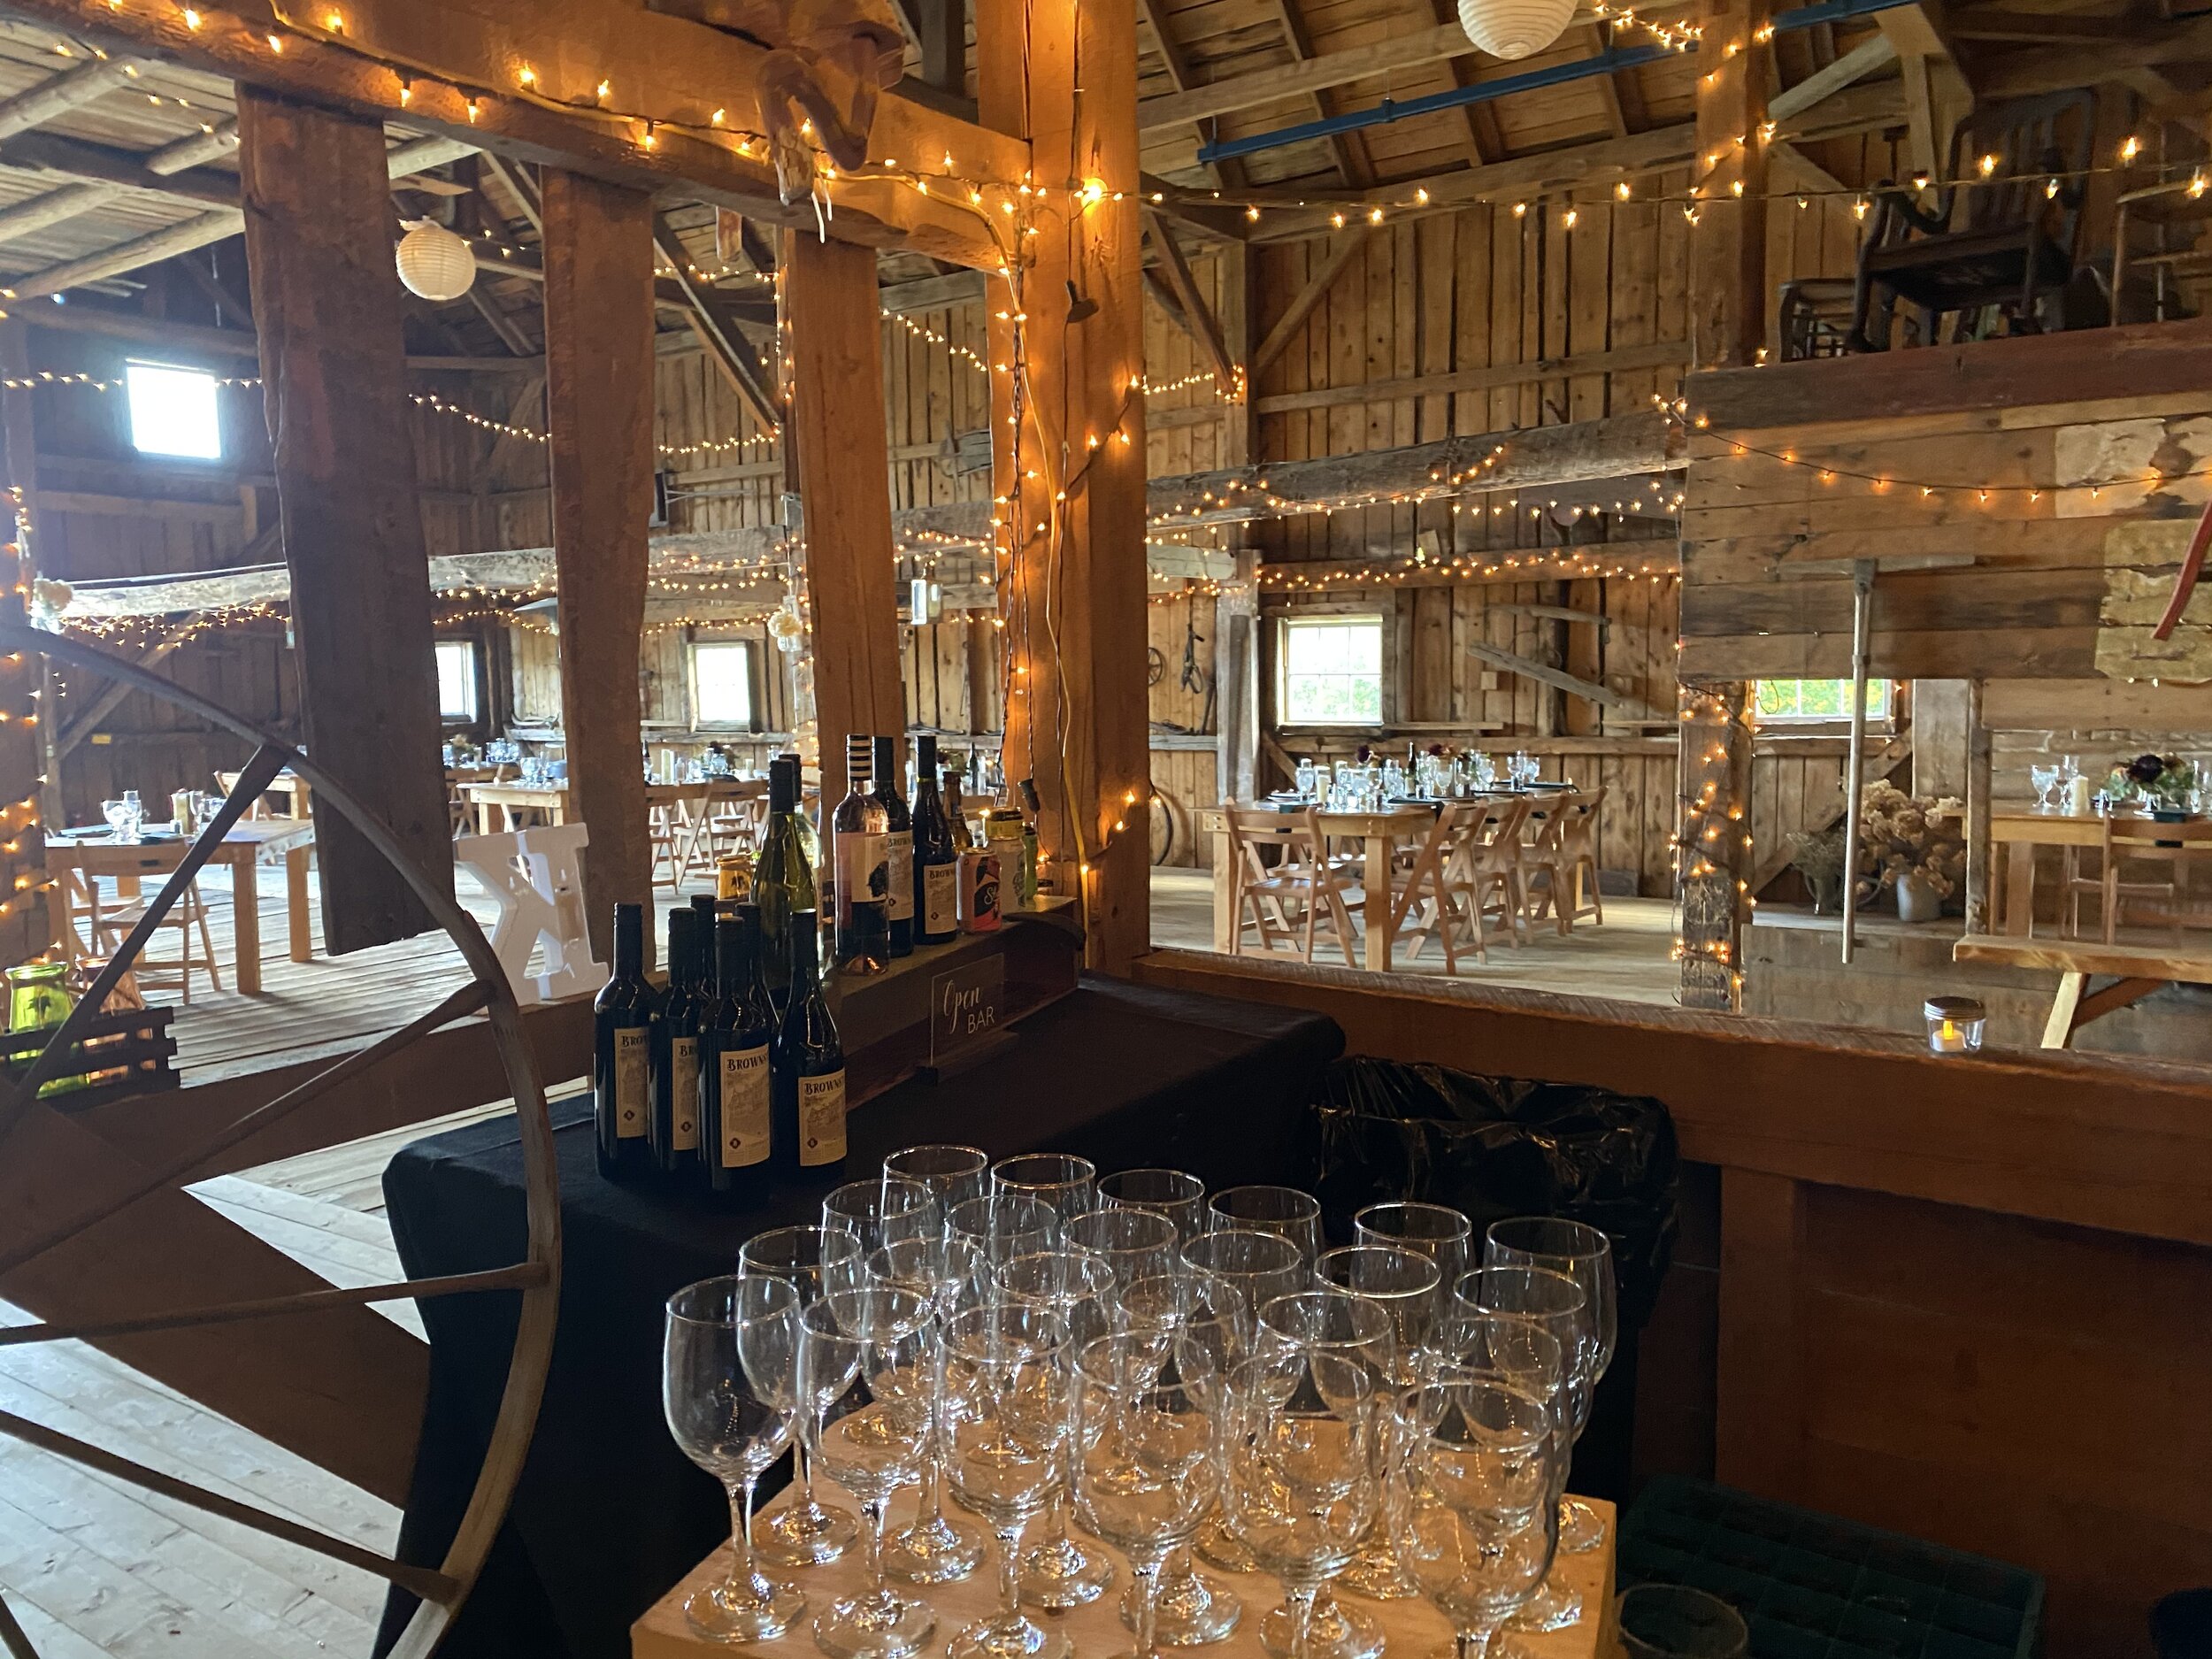 Wineglasses set up at the bar in a twinkle lit barn getting ready for an event